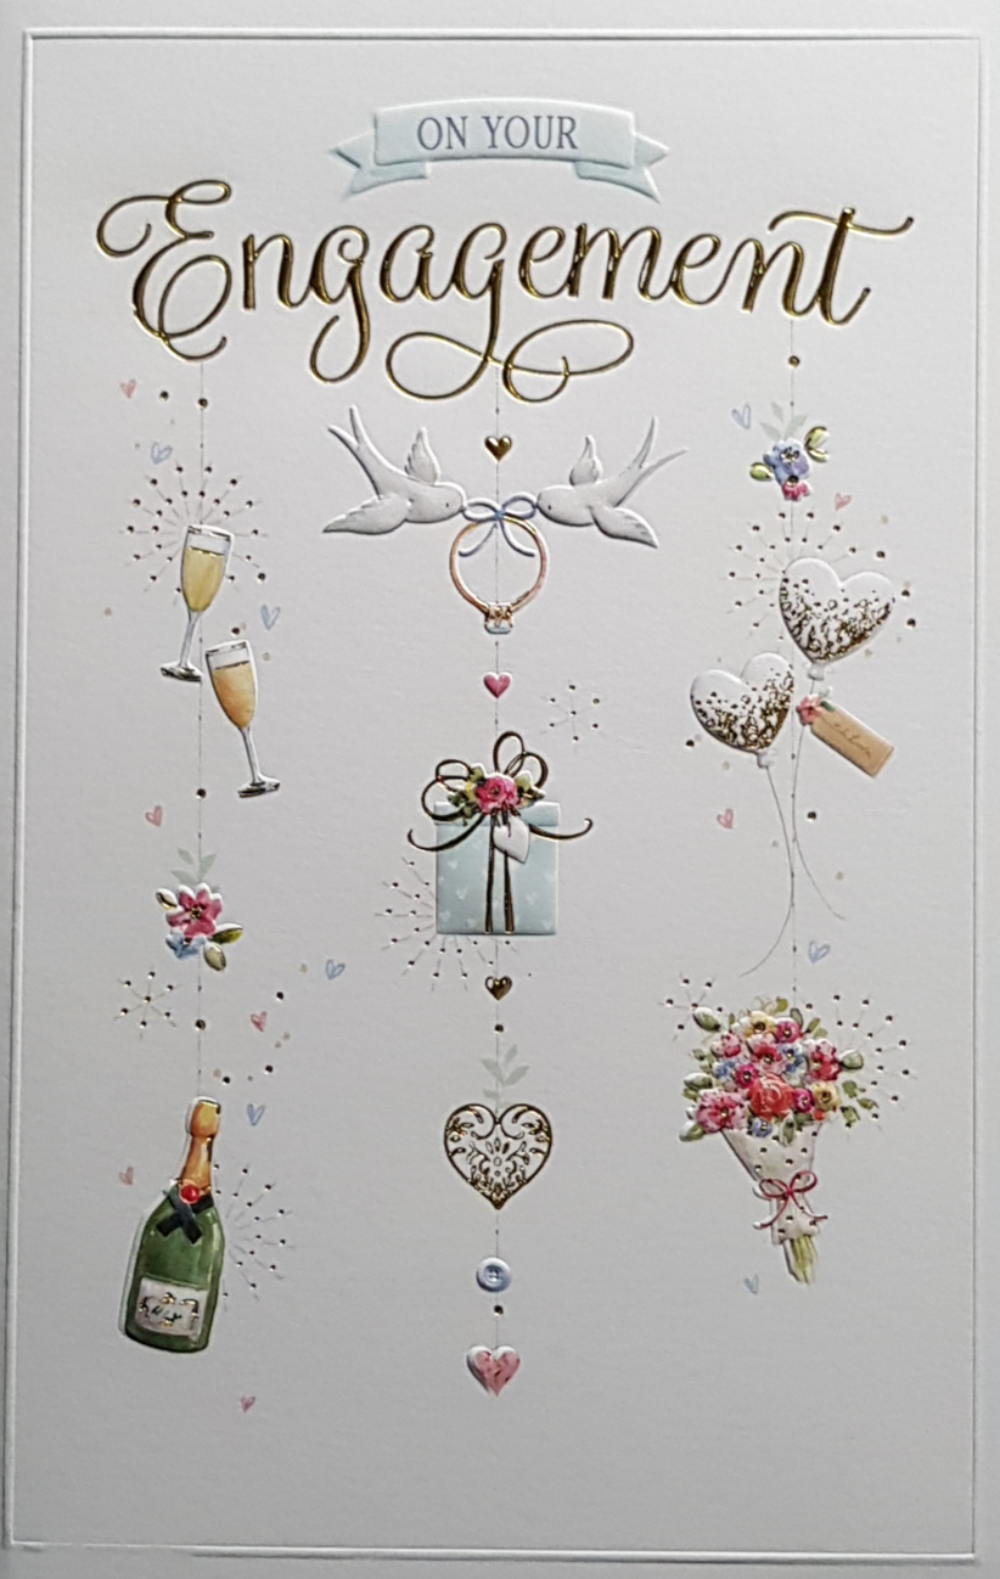 Engagement Card - Champagne & Birds & Gifts & Wine Glasses Hanging From Top